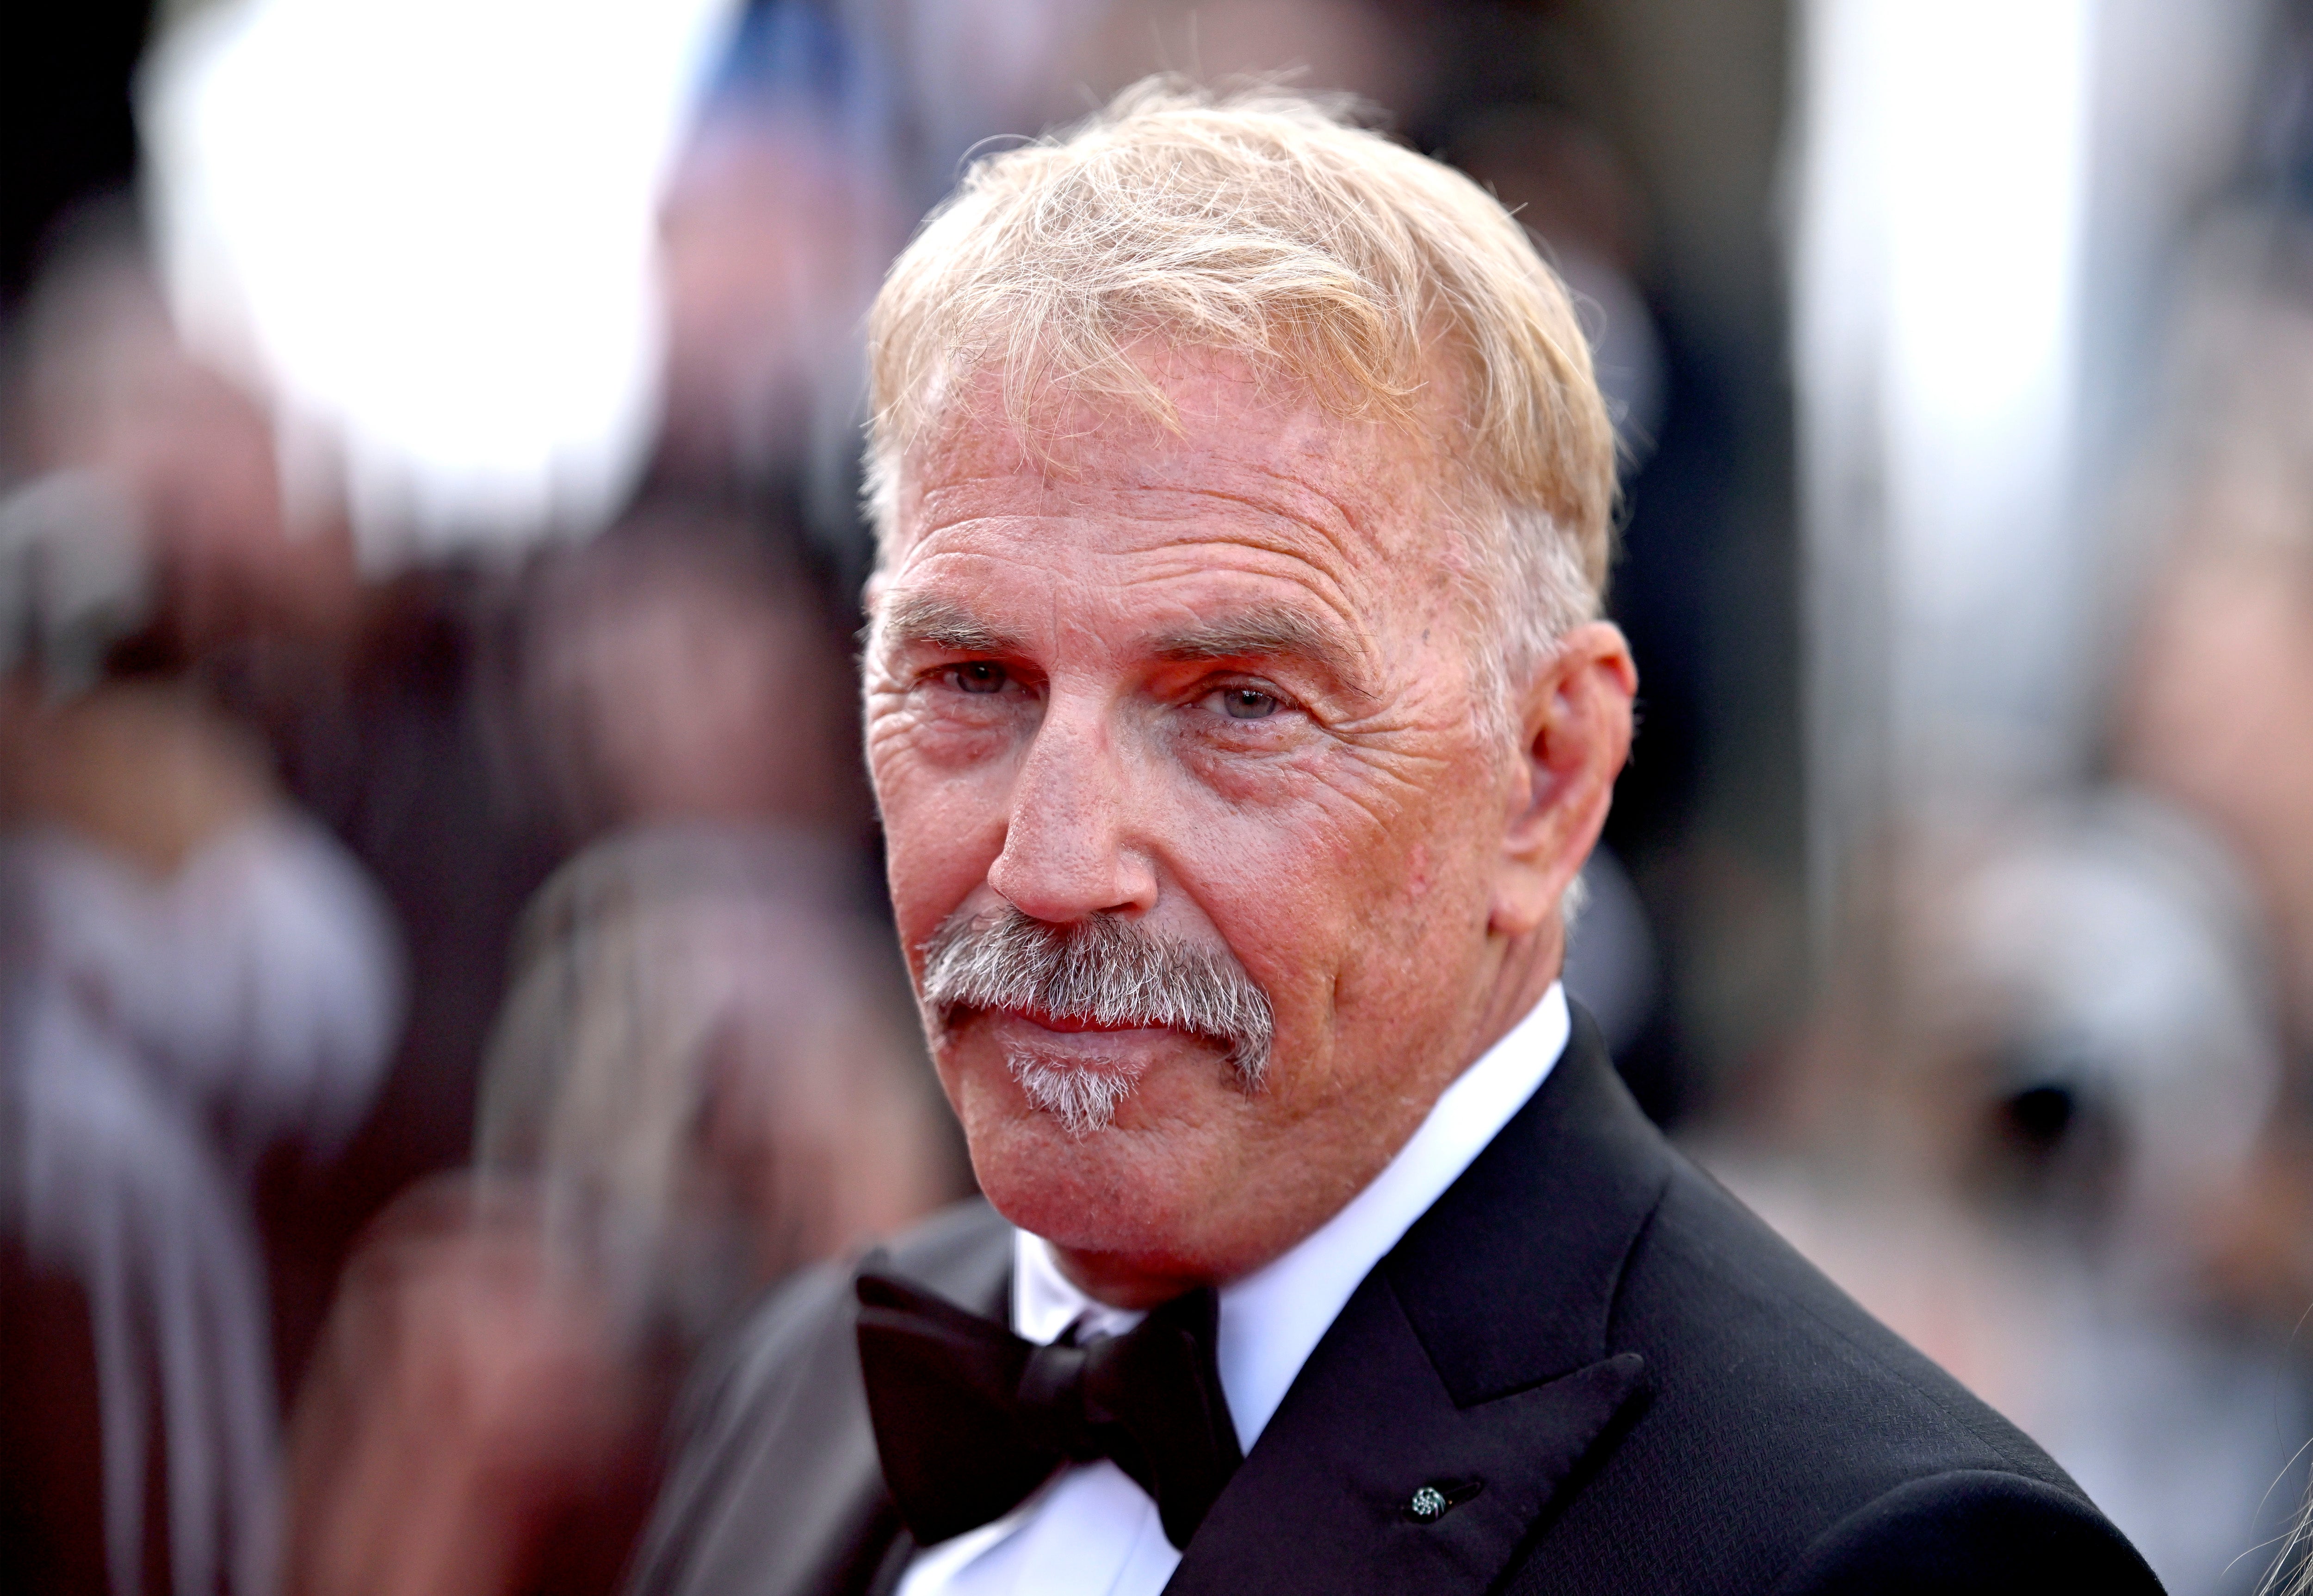 Kevin Costner attends the ‘Horizon: An American Saga' Red Carpet at the 77th annual Cannes Film Festival